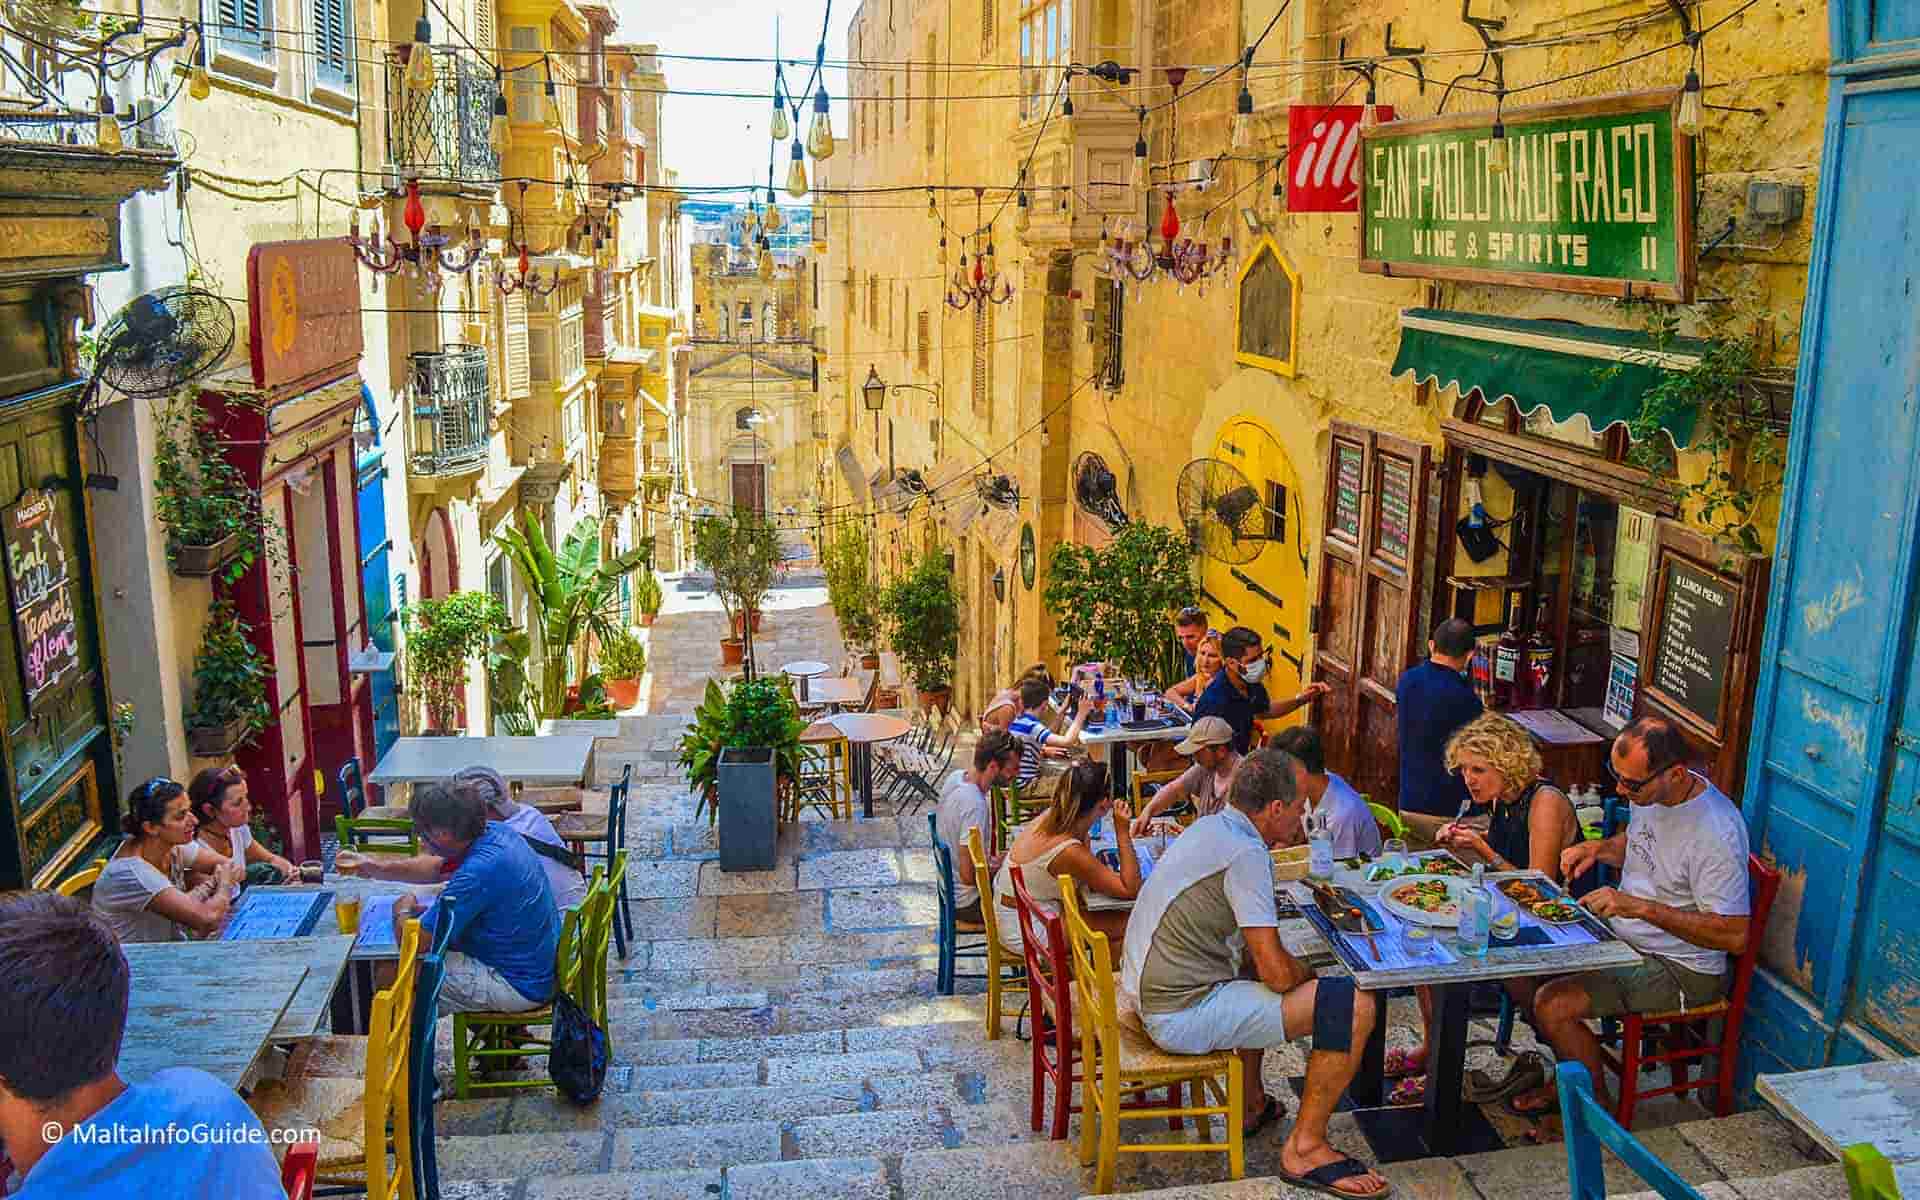 People eating at a restaurant at one of Valletta's most beautiful streets.